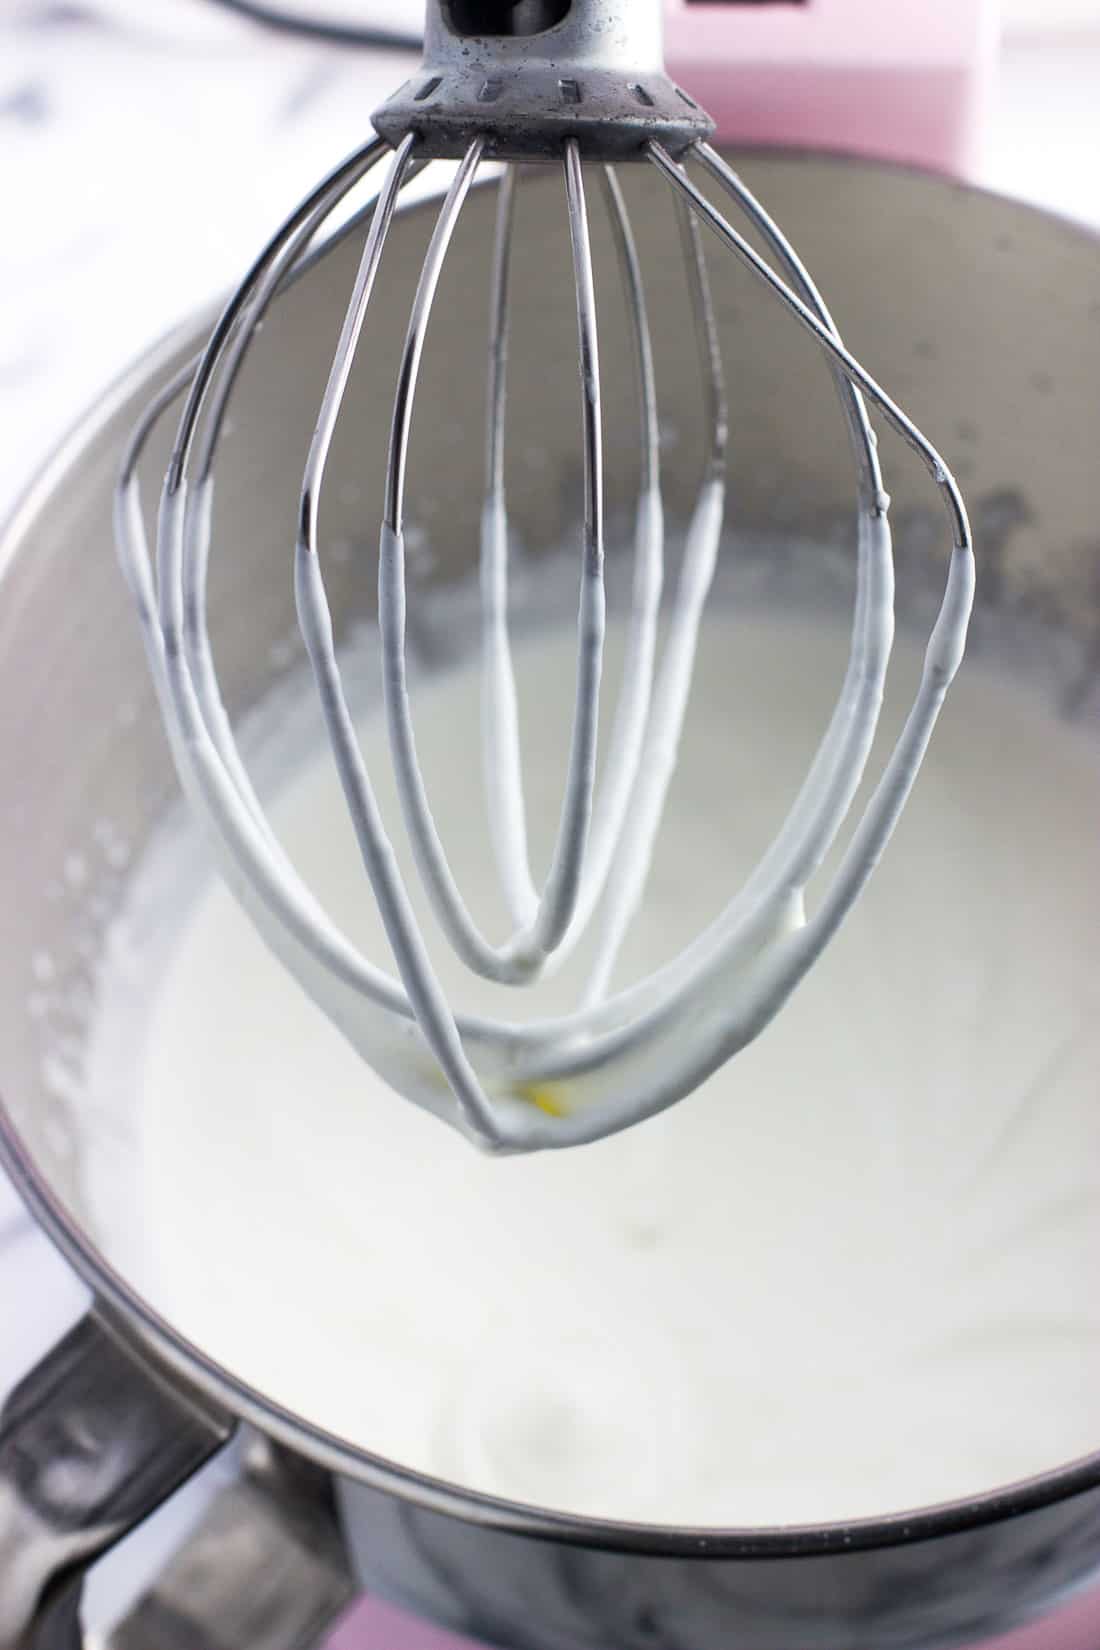 A stand mixer whisk attachment lifted out of the whipped cream mixture as it begins to thicken.